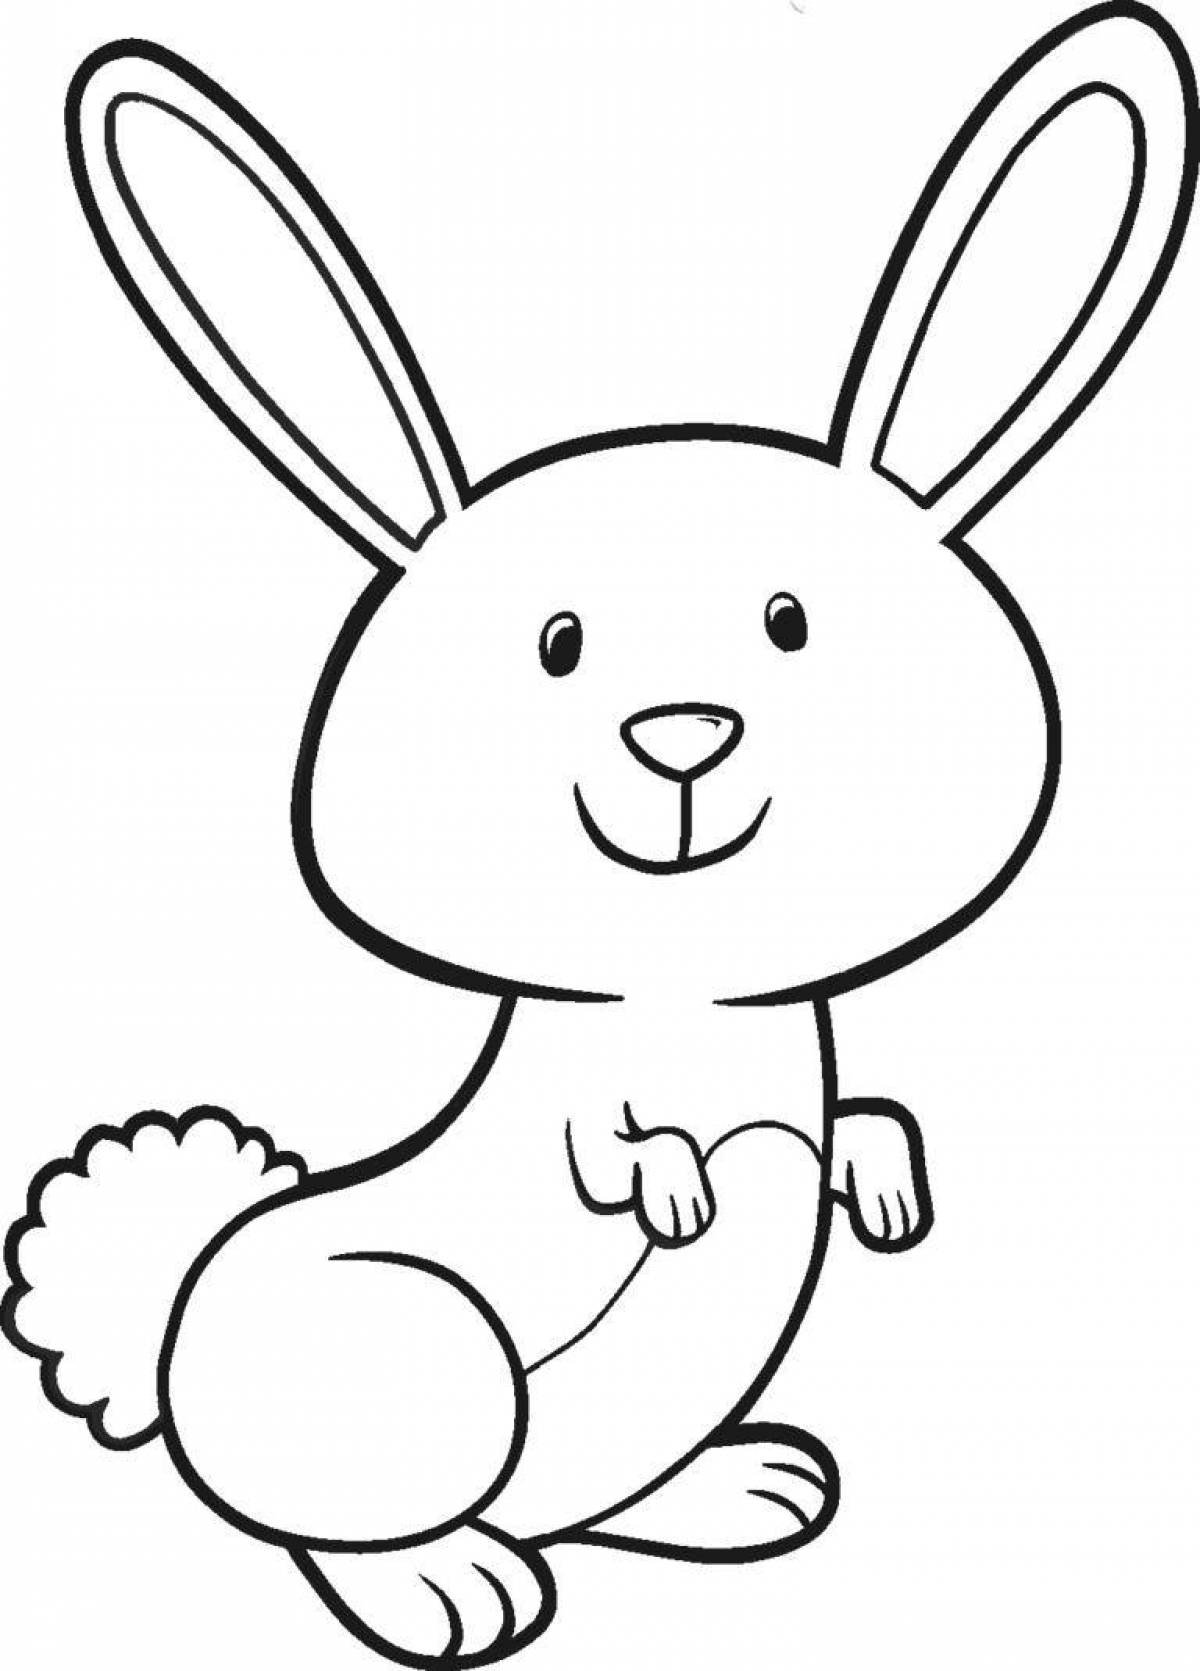 Happy coloring drawing of a hare for children